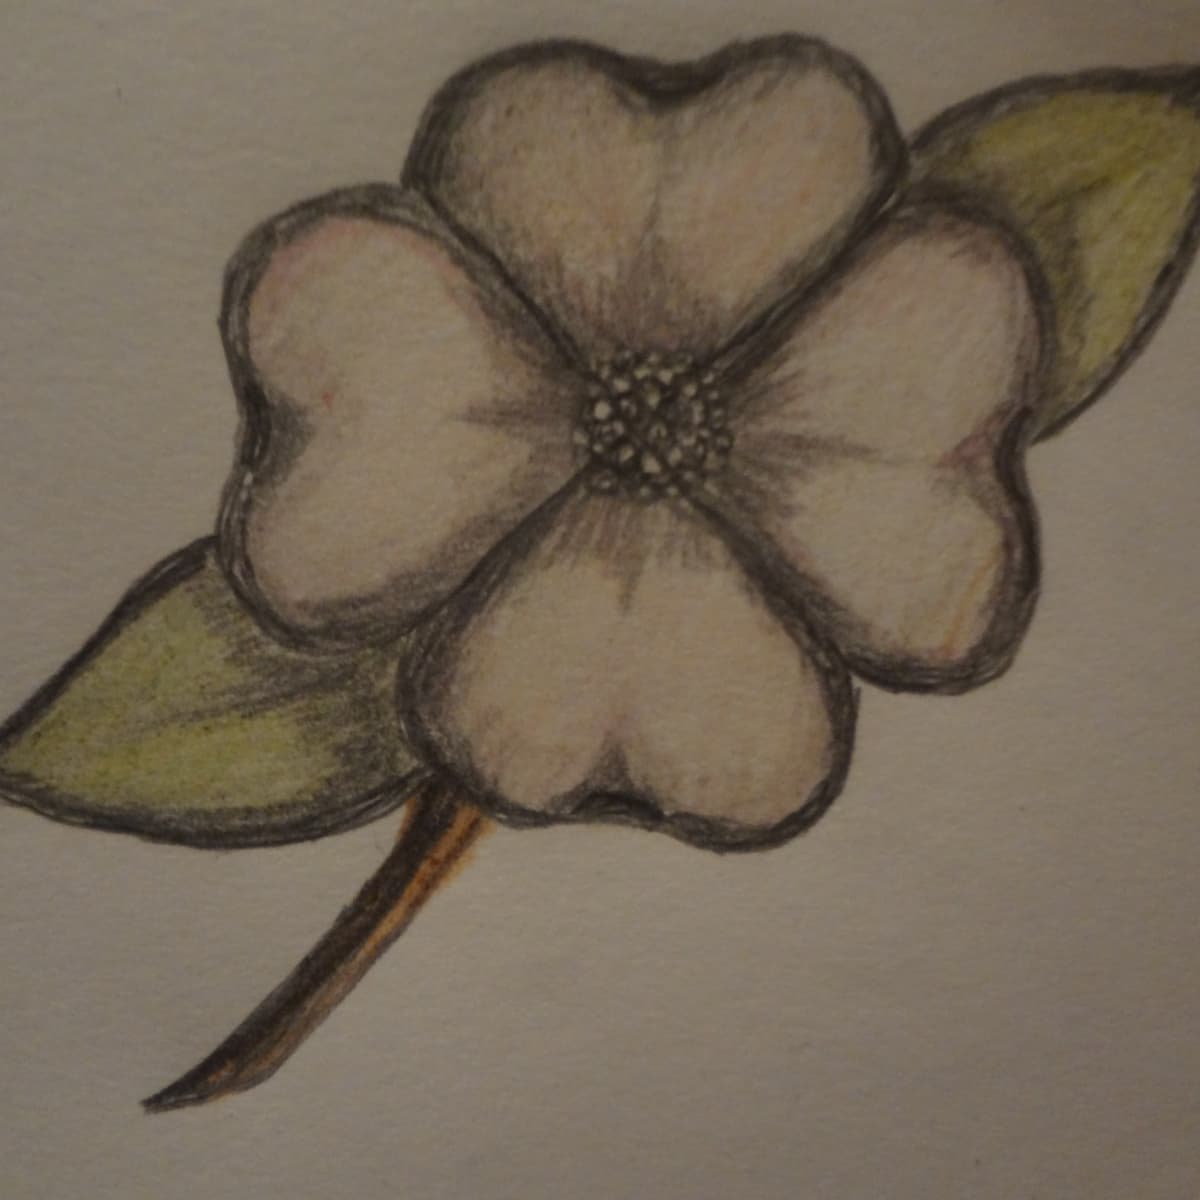 how to draw a flower